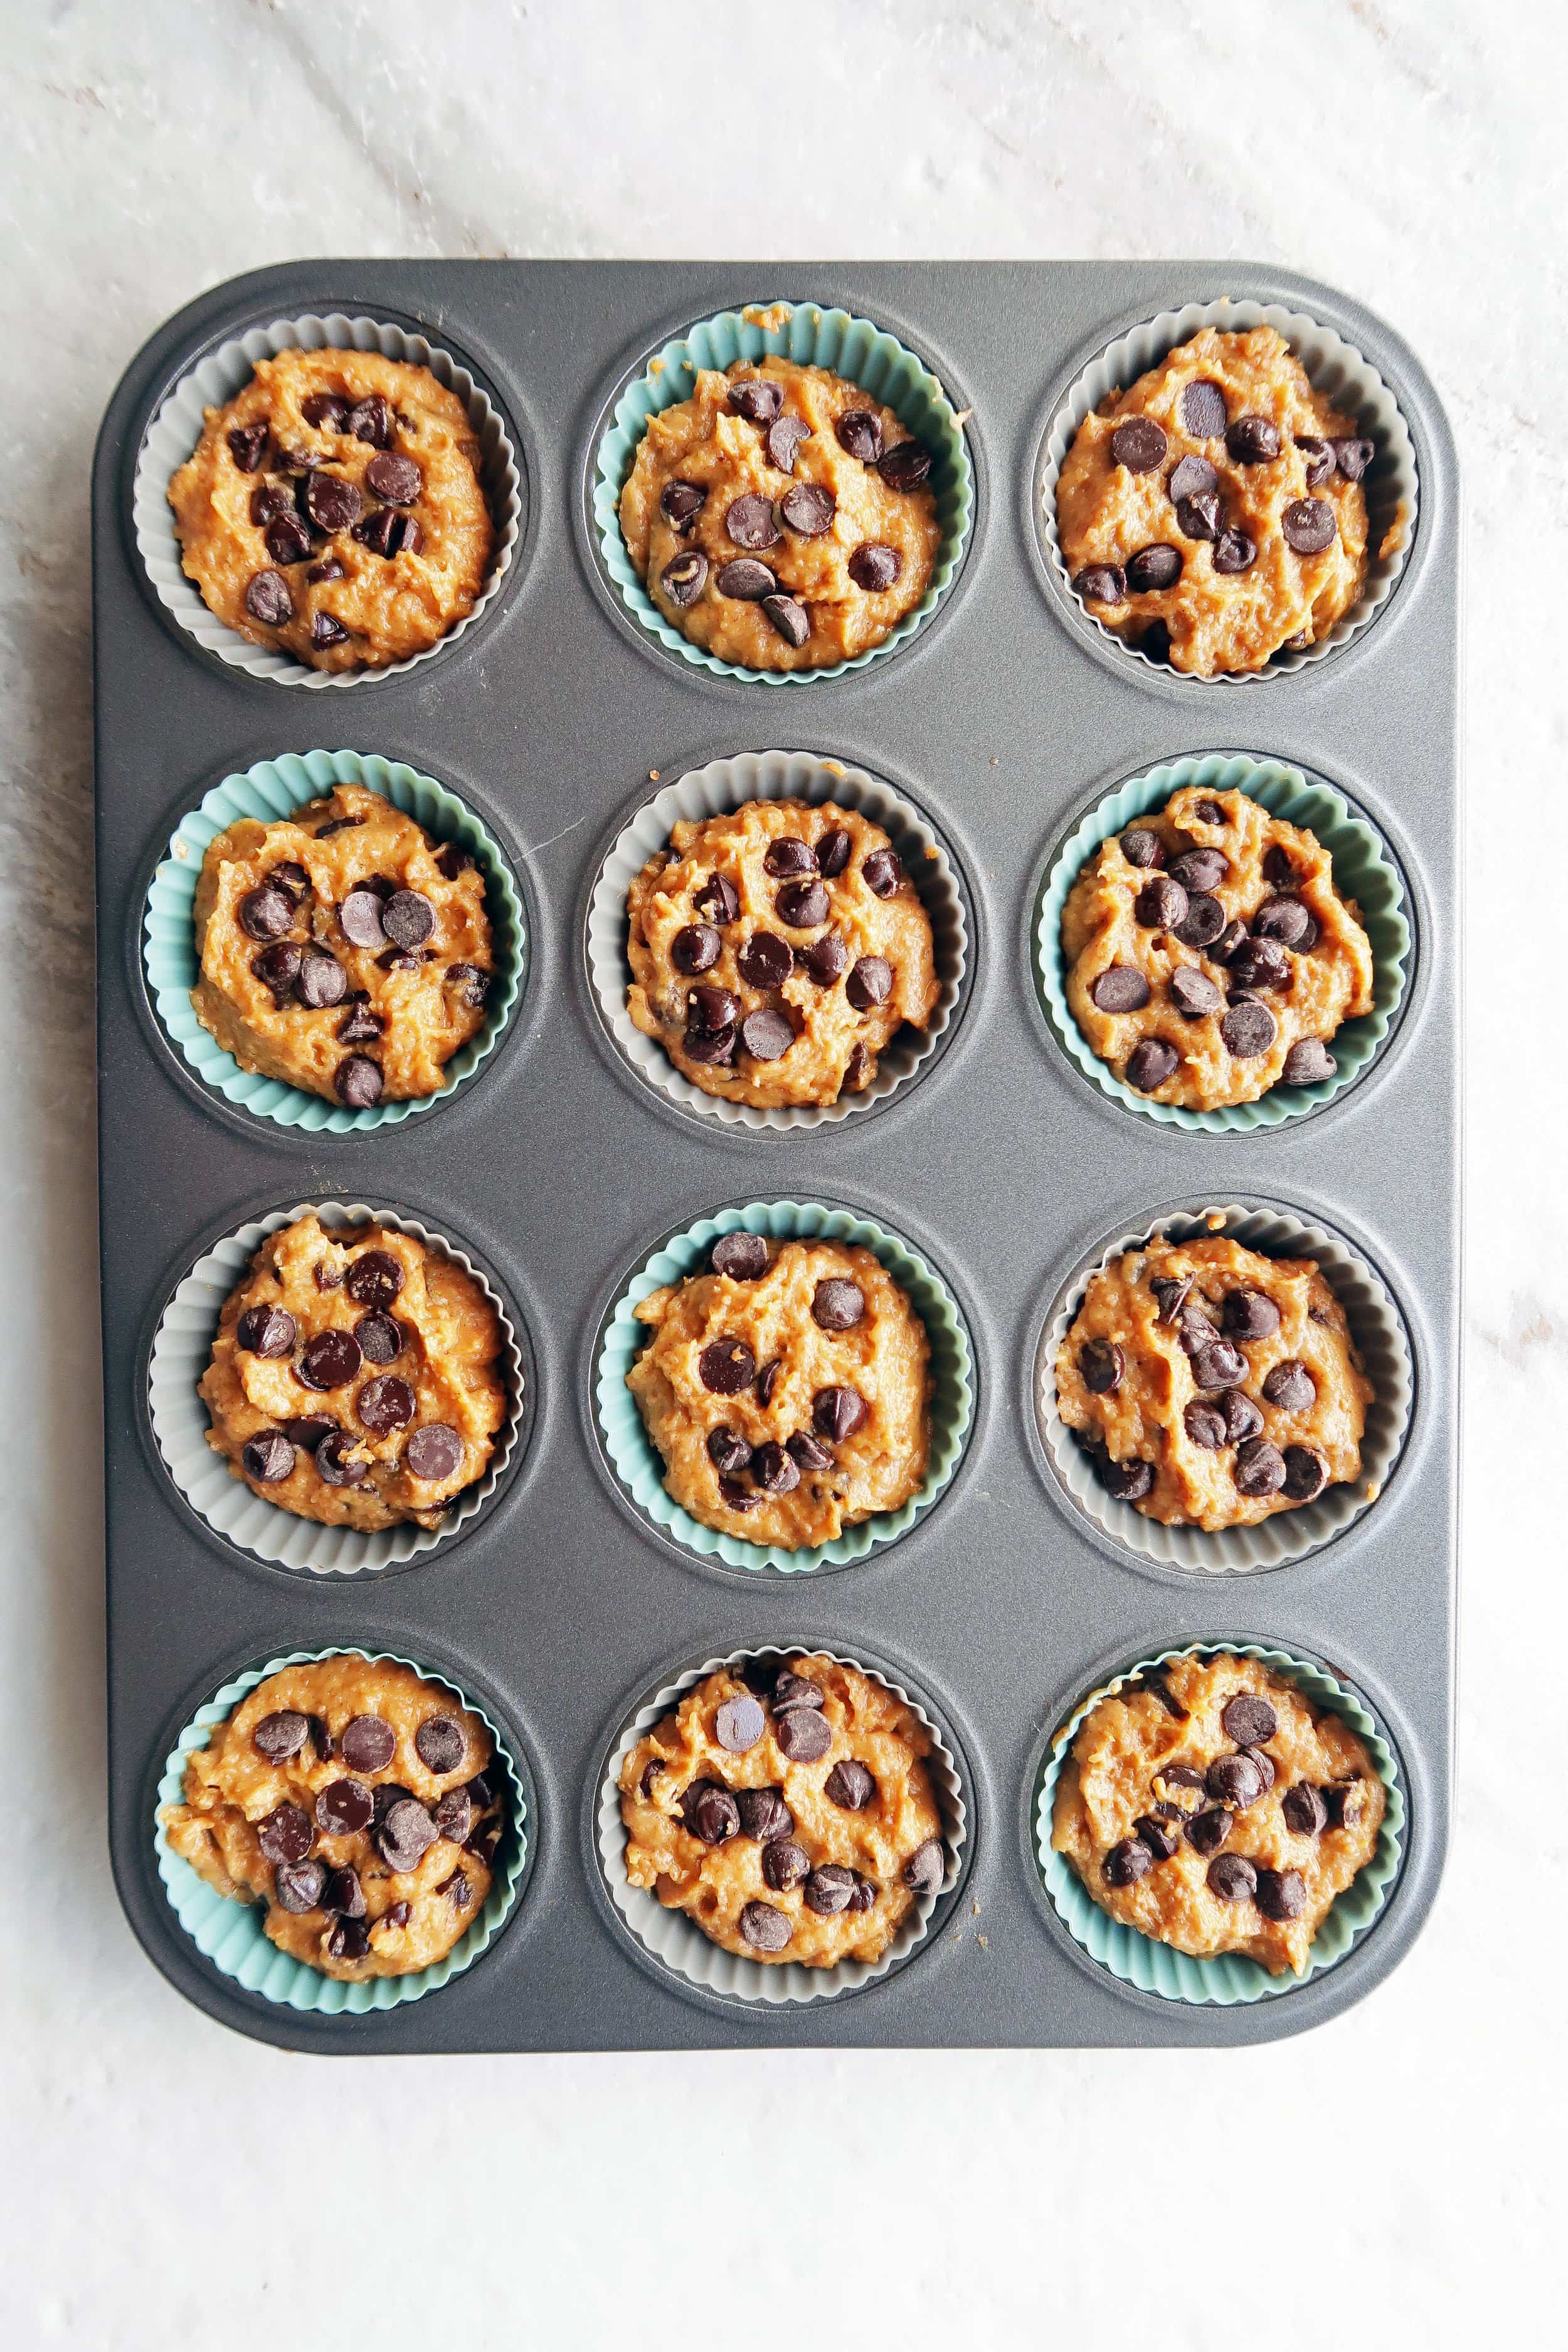 Pumpkin chocolate chip whole wheat muffin batter scooped evenly into a 12 cup muffin pan.